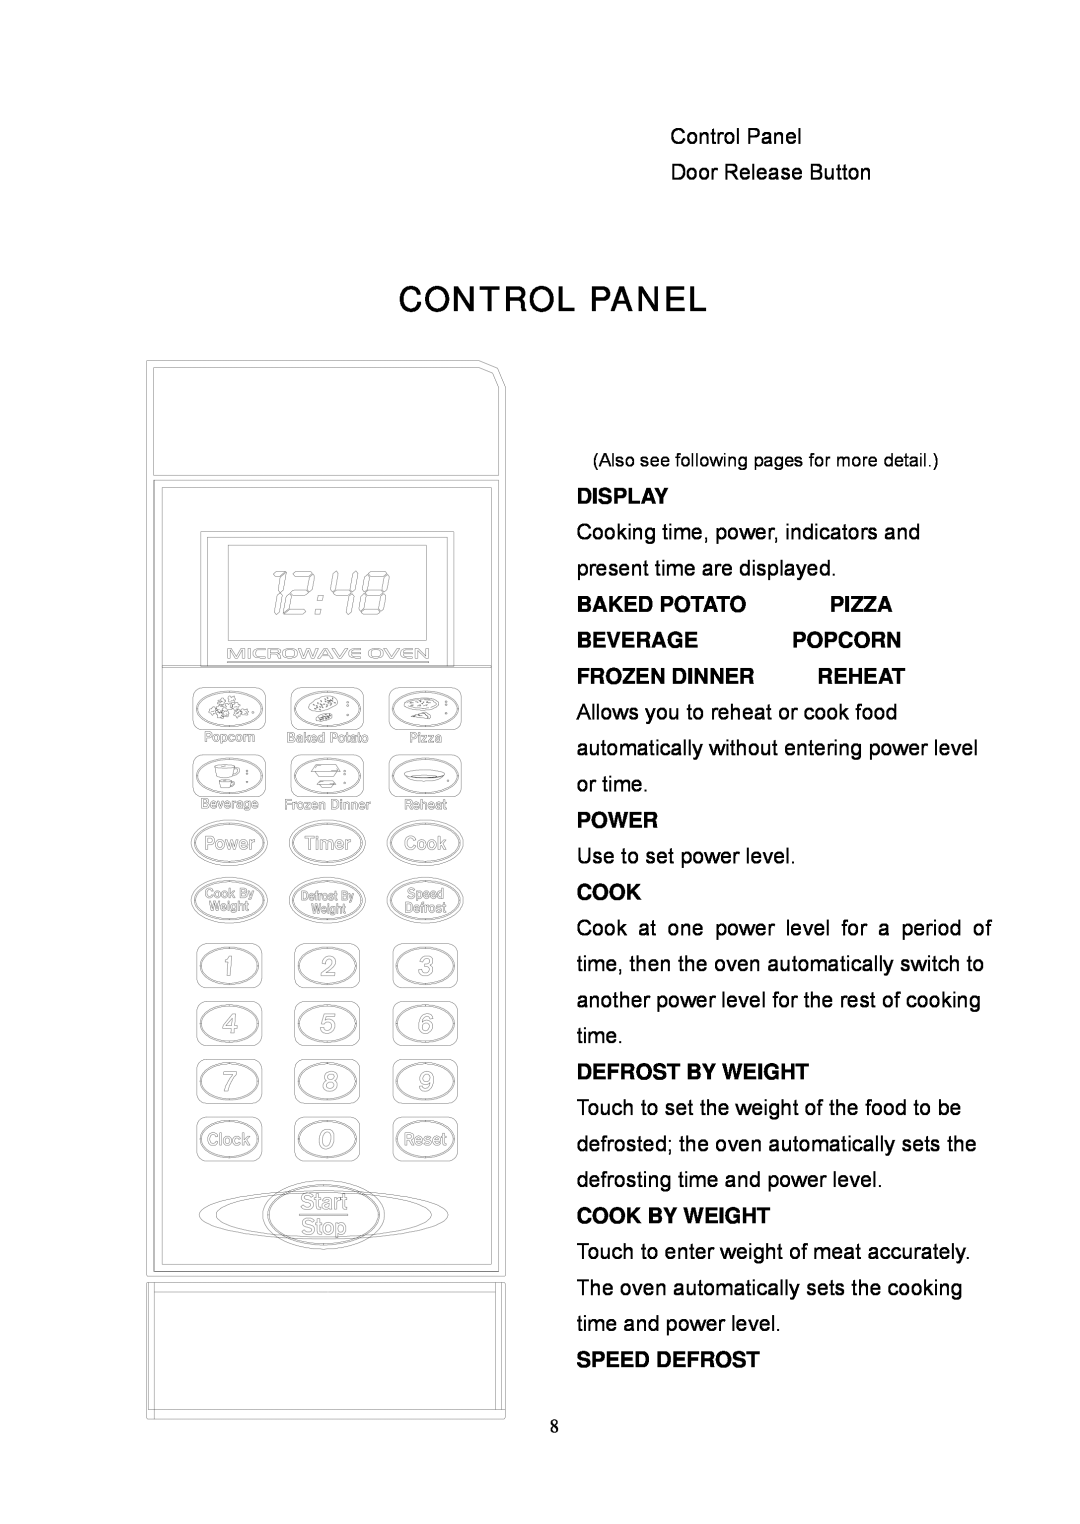 Tappan TM7050S Control Panel, Display, Baked Potato, Beverage, Popcorn, Frozen Dinner, Power, Cook, Defrost By Weight 